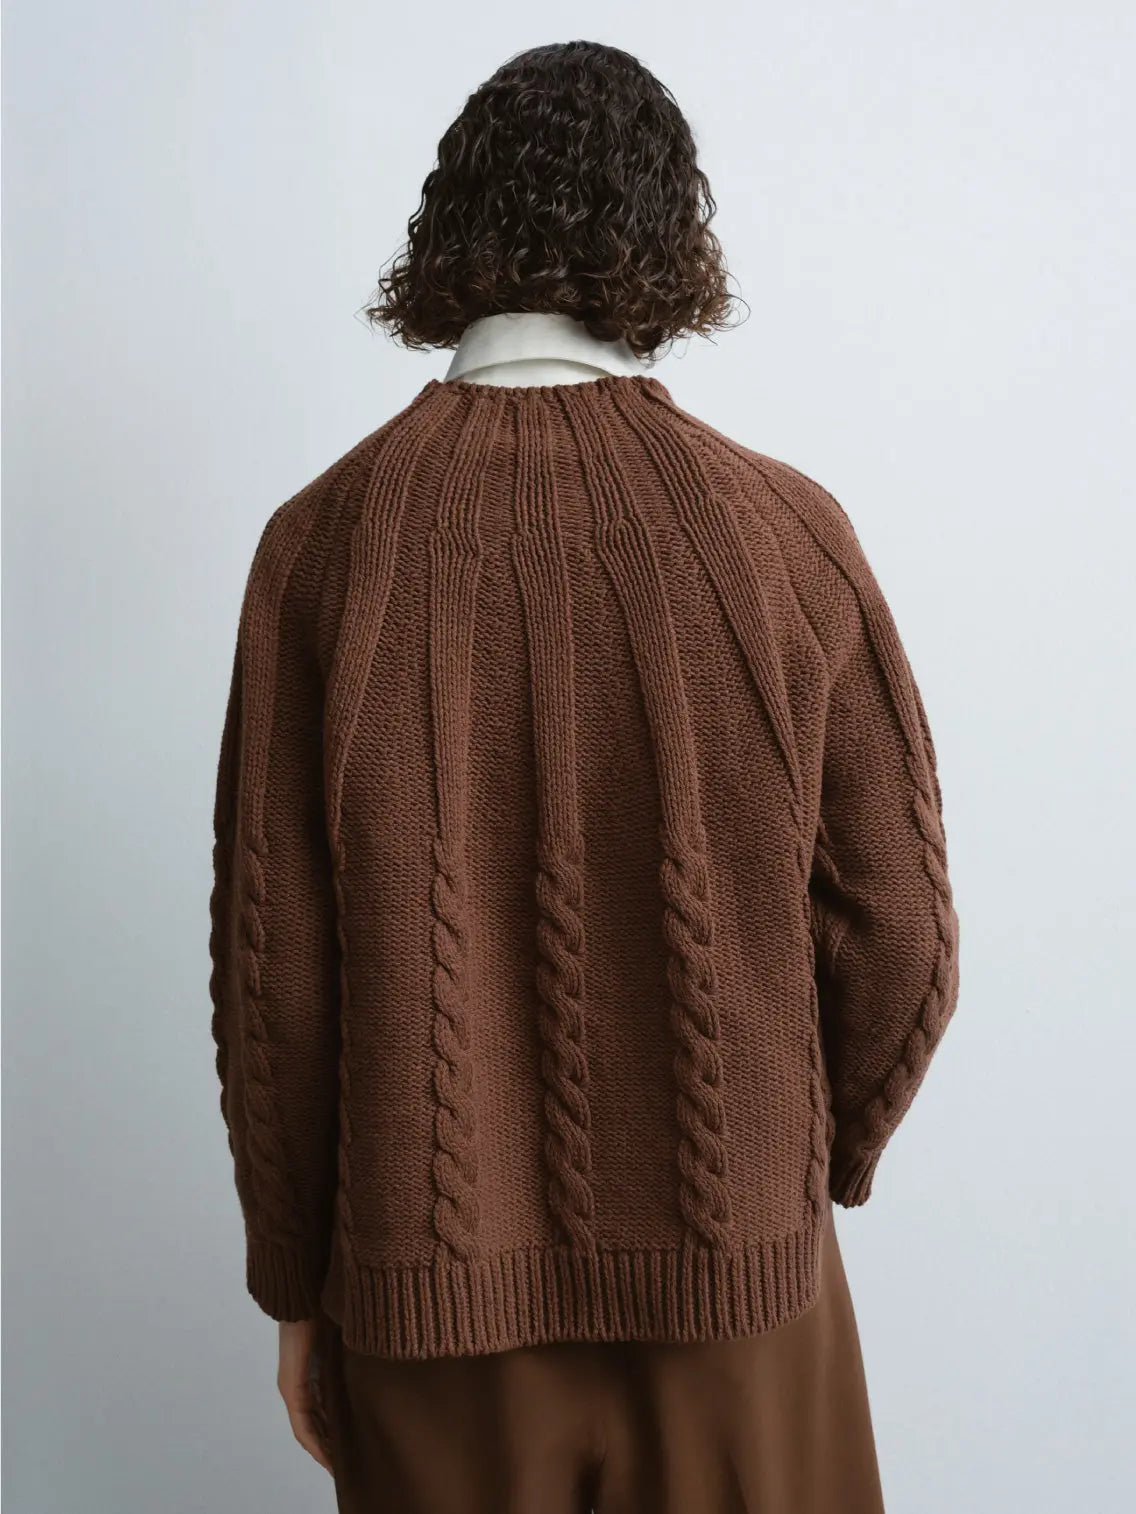 Cotton Cable Sweater Madera with a crew neck by Cordera. The sweater features intricate braided patterns on the front and sleeves, and ribbing at the collar, cuffs, and hem. The overall design is cozy and suitable for cool weather. Find this timeless piece at our Barcelona-based Bassalstore.